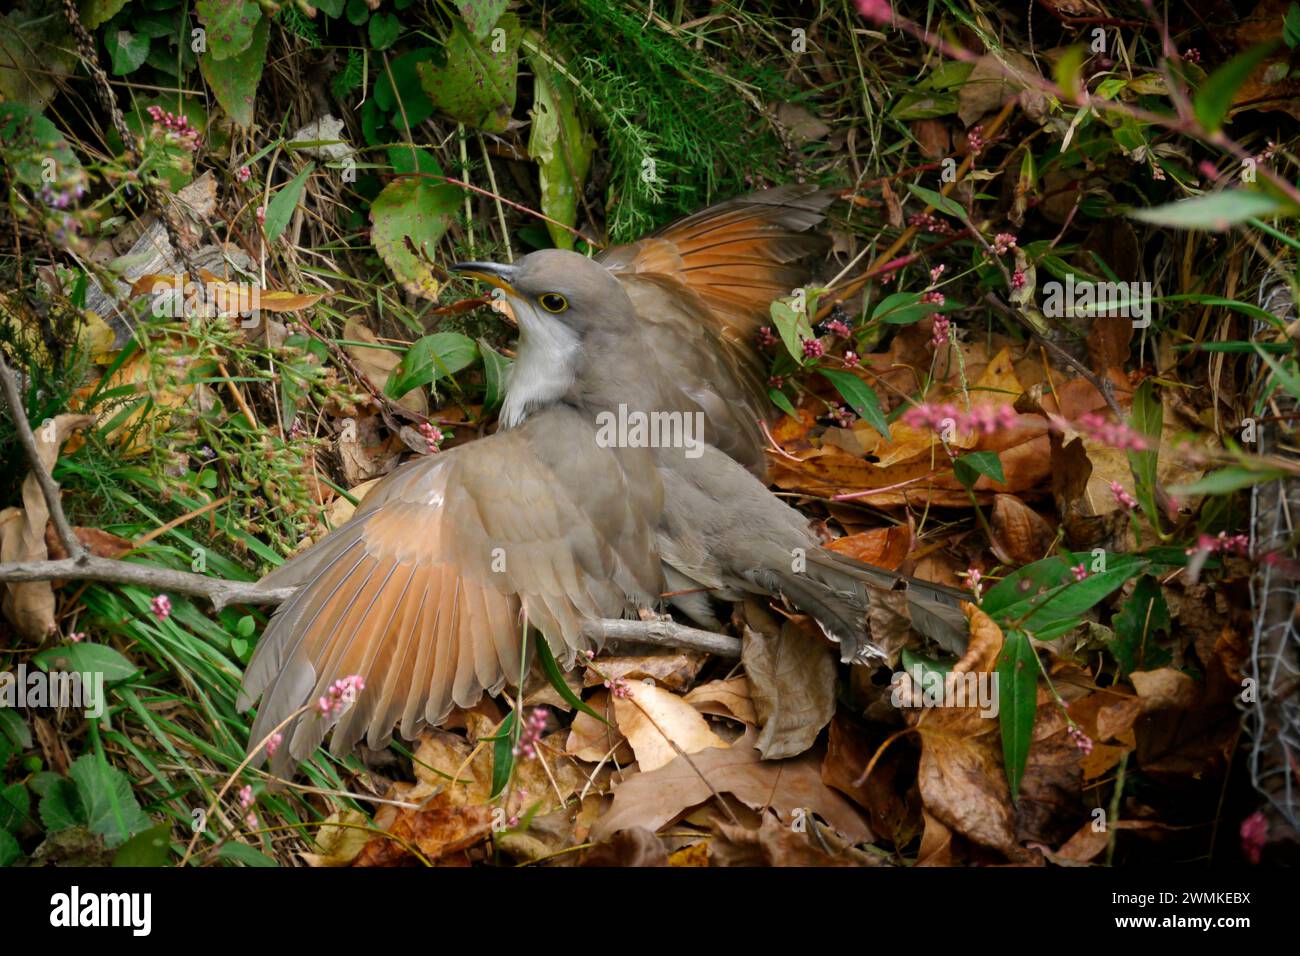 Bird on the ground with outstretched wings hiding in foliage Stock Photo